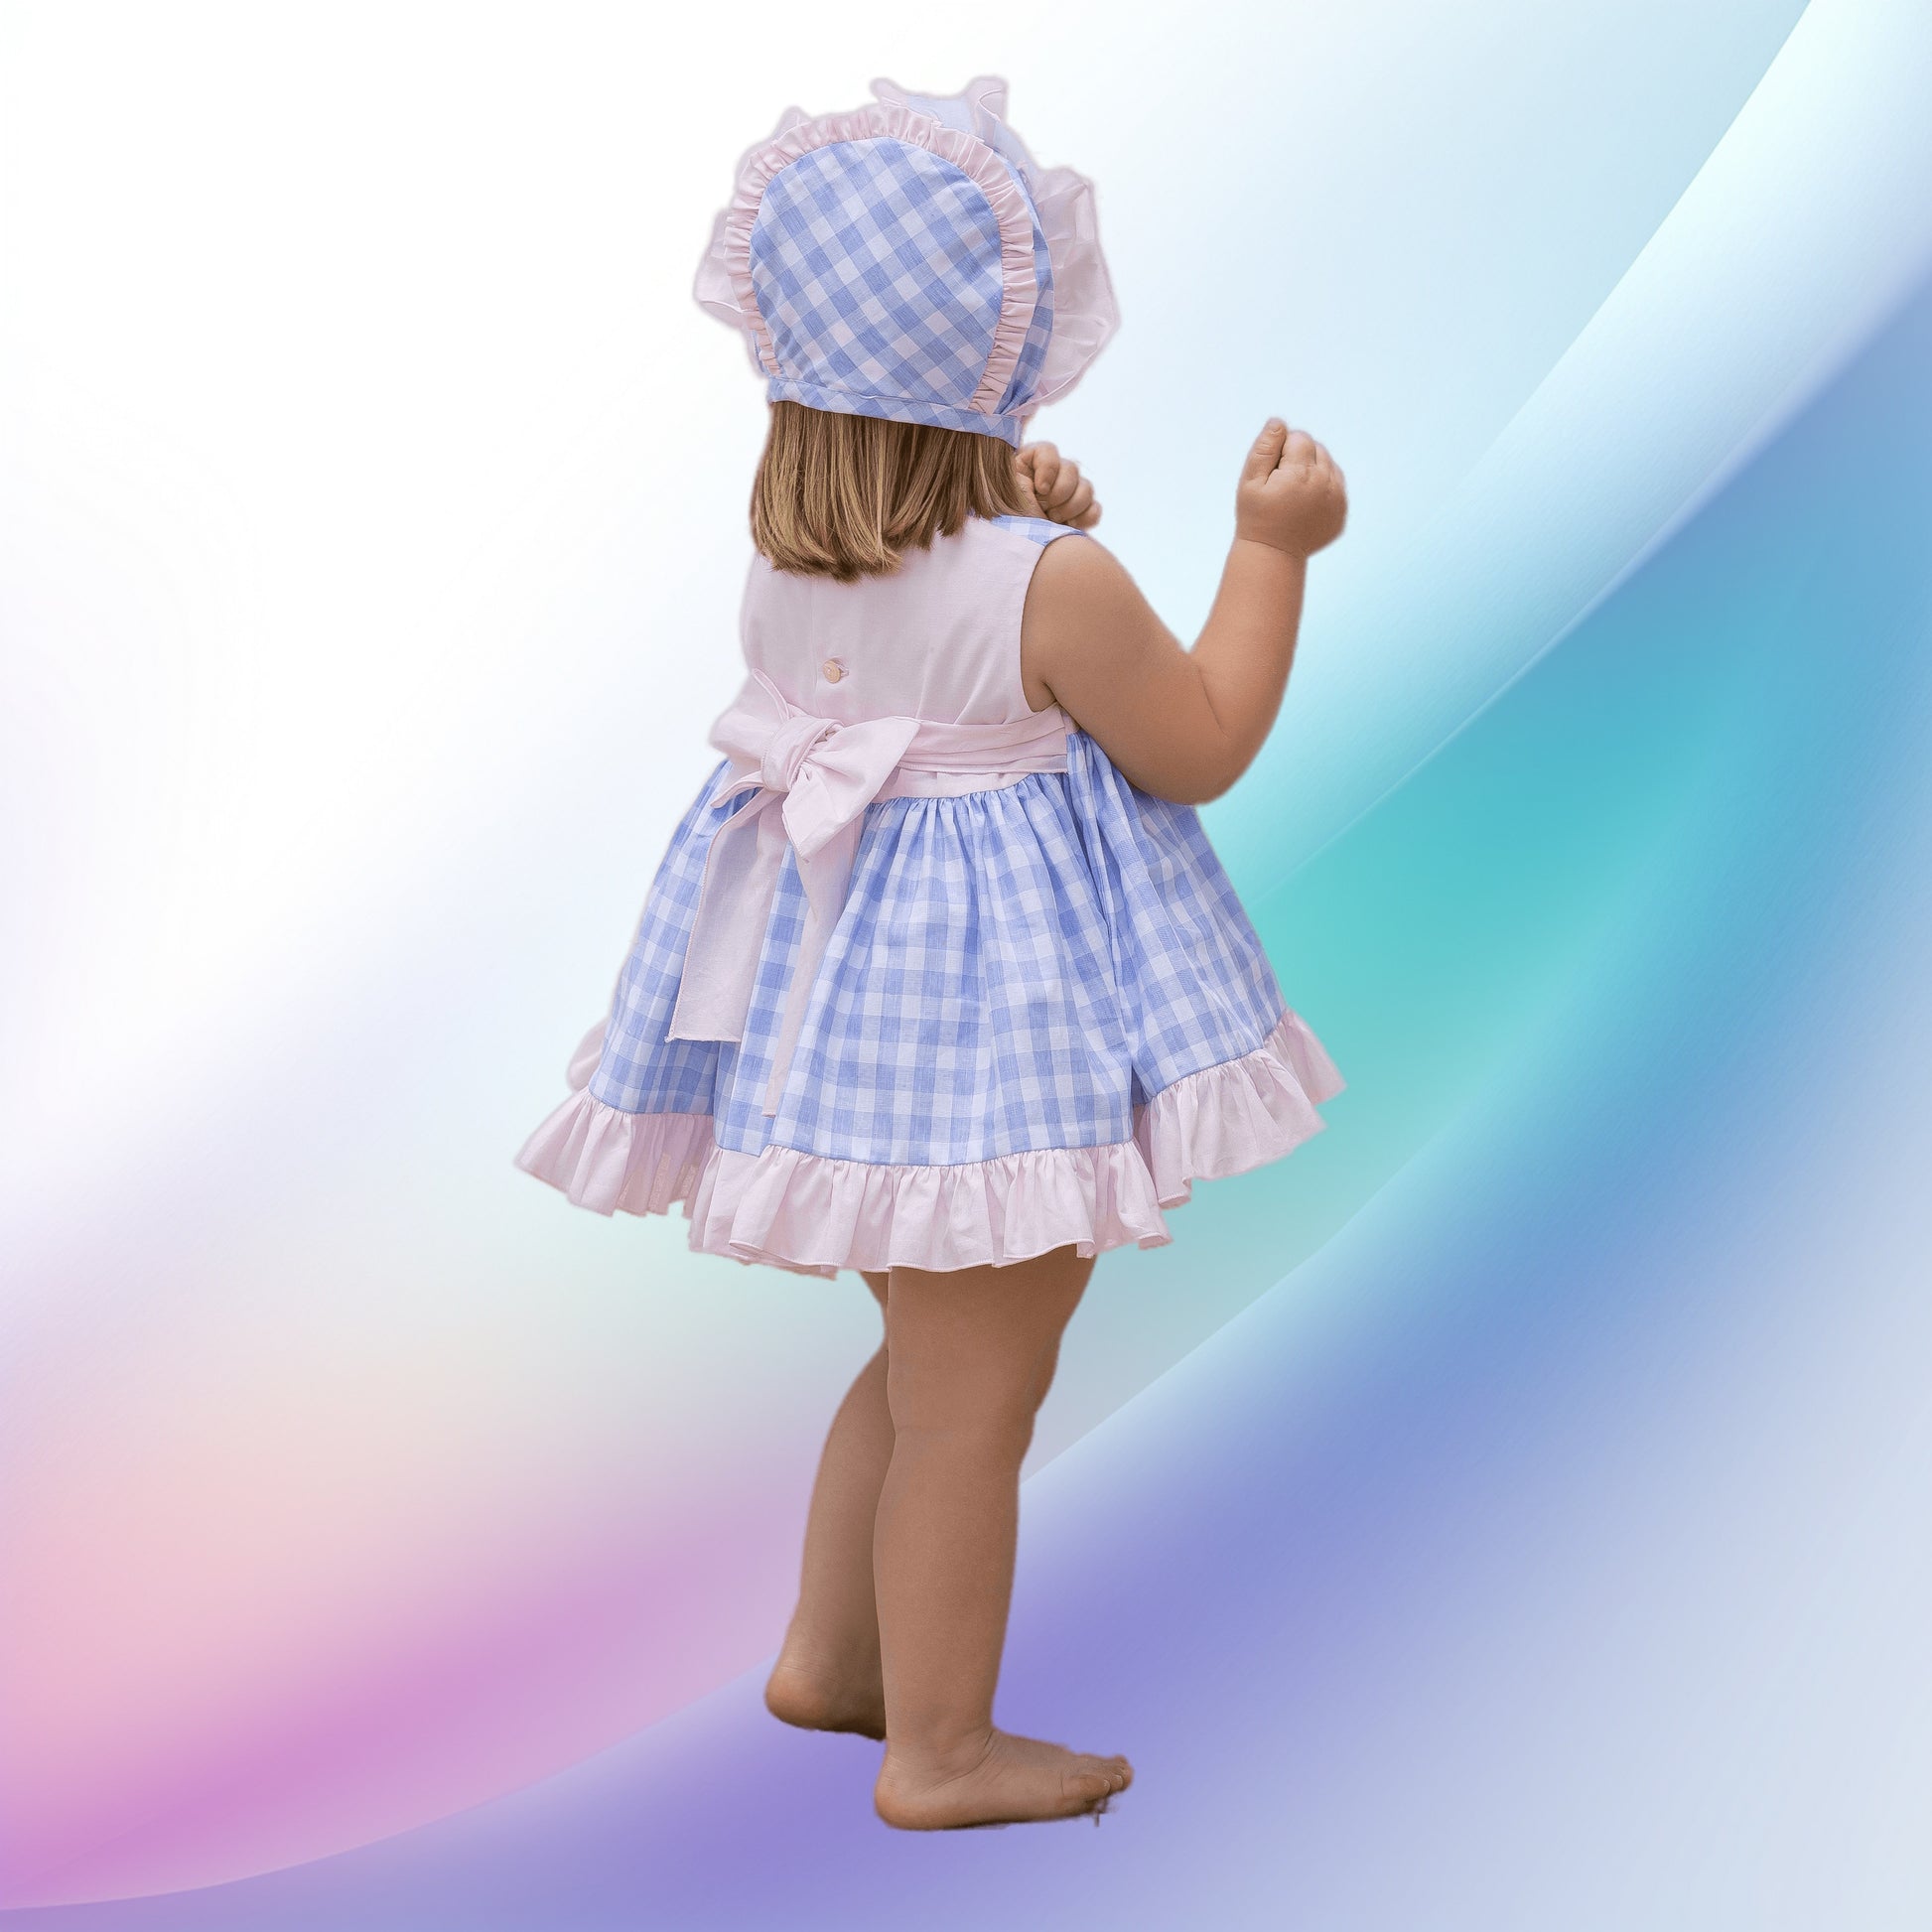 Image of a girls vintage blue gingham dress and diadem by Abuela Tata, perfect for a baby or toddler attending a party or wedding. The lightweight, machine-washable dress features a lavender blue and white check pattern, a charming pink bodice panel with lace and tulle bows, and a large back bow for easy dressing.